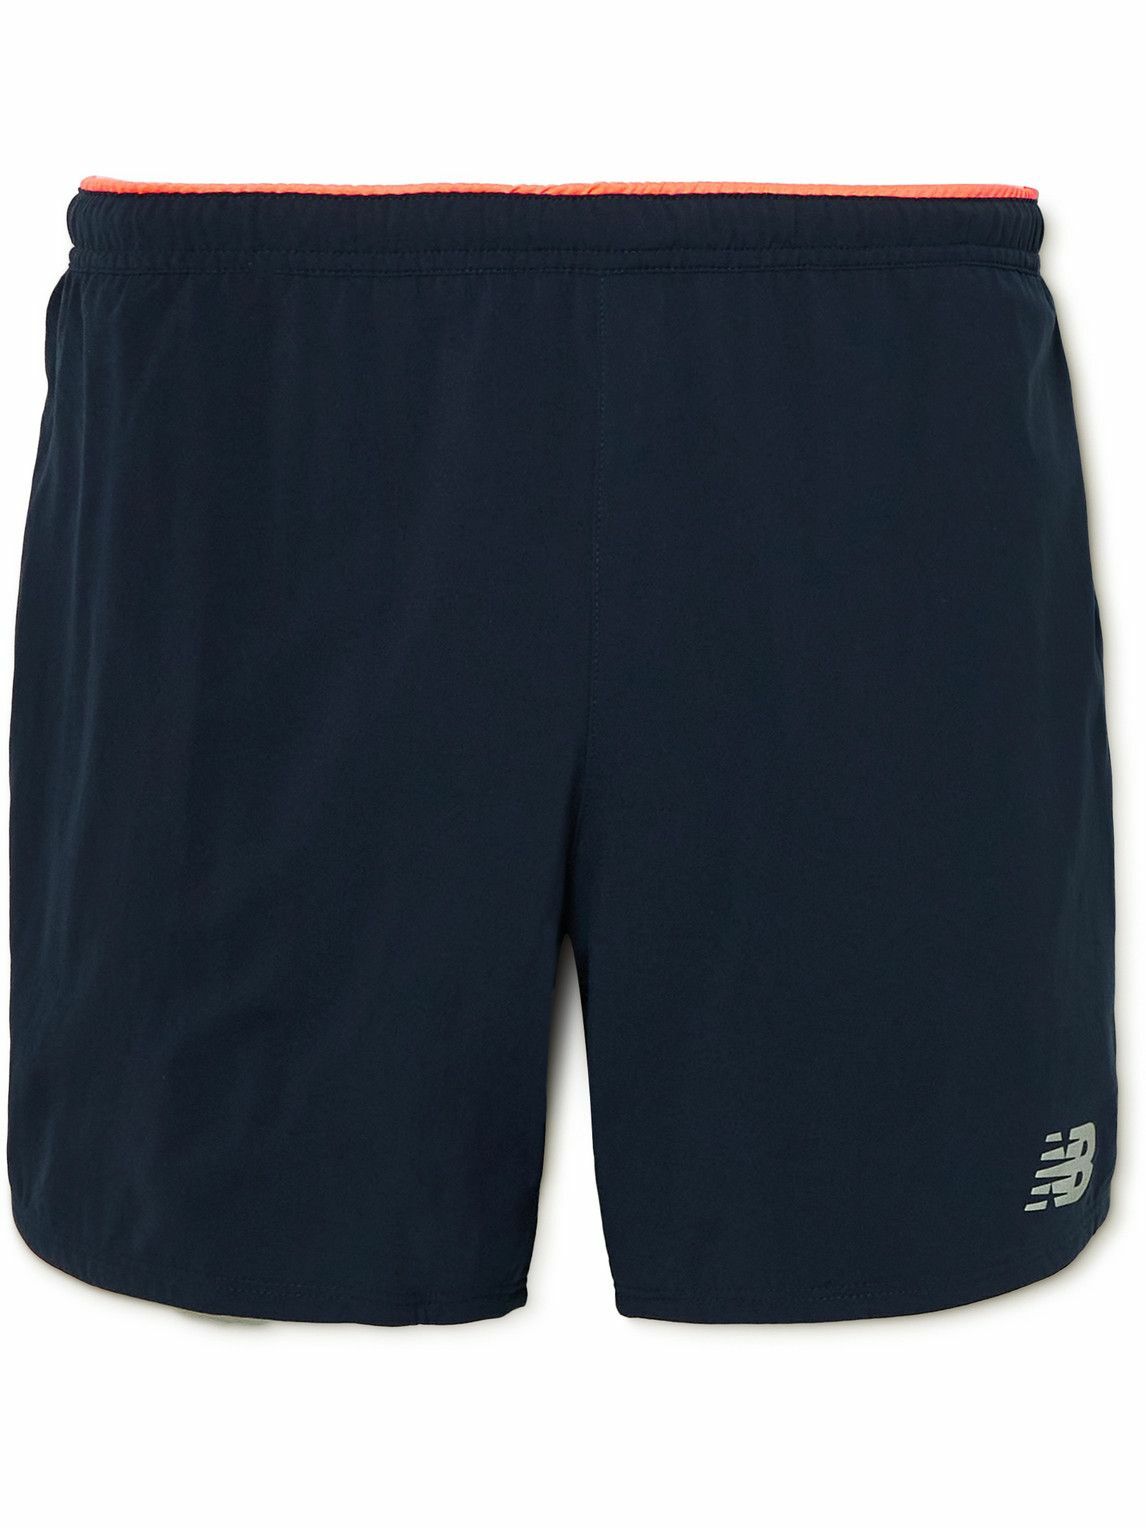 Photo: New Balance - Graphic Impact Run Slim-Fit Printed Recycled NB DRY Shorts - Blue